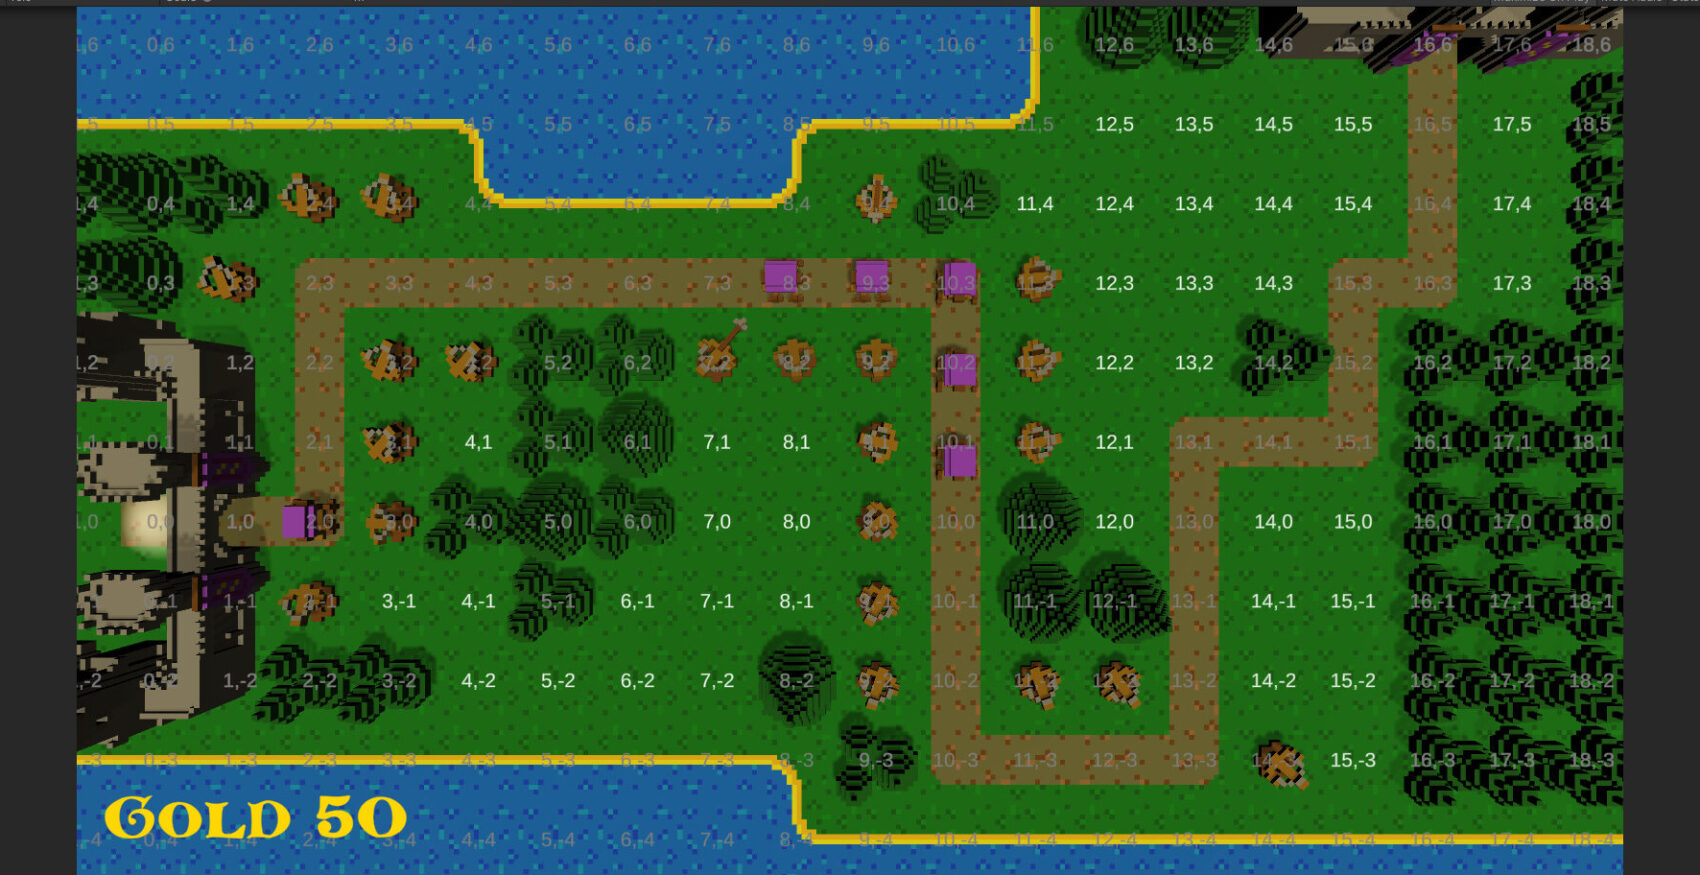 A prototype tower defense game